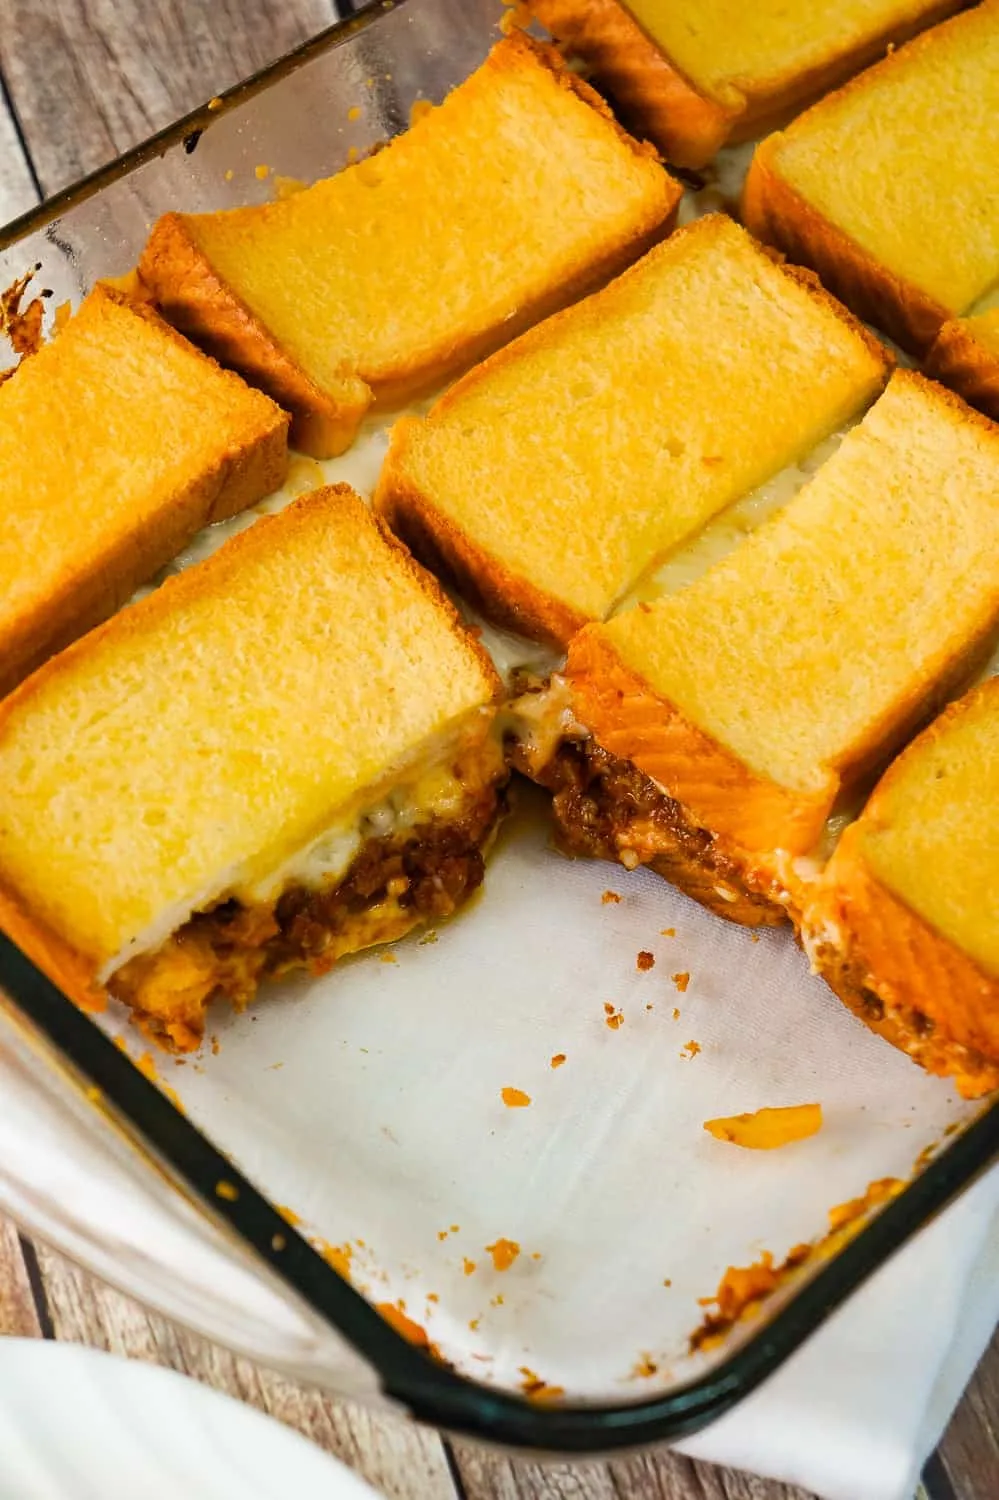 Sloppy Joe Grilled Cheese Casserole is an easy ground beef dinner recipe your whole family will love. This tasty casserole is loaded with mozzarella cheese and sloppy joe filling sandwiched between two layers of bread.